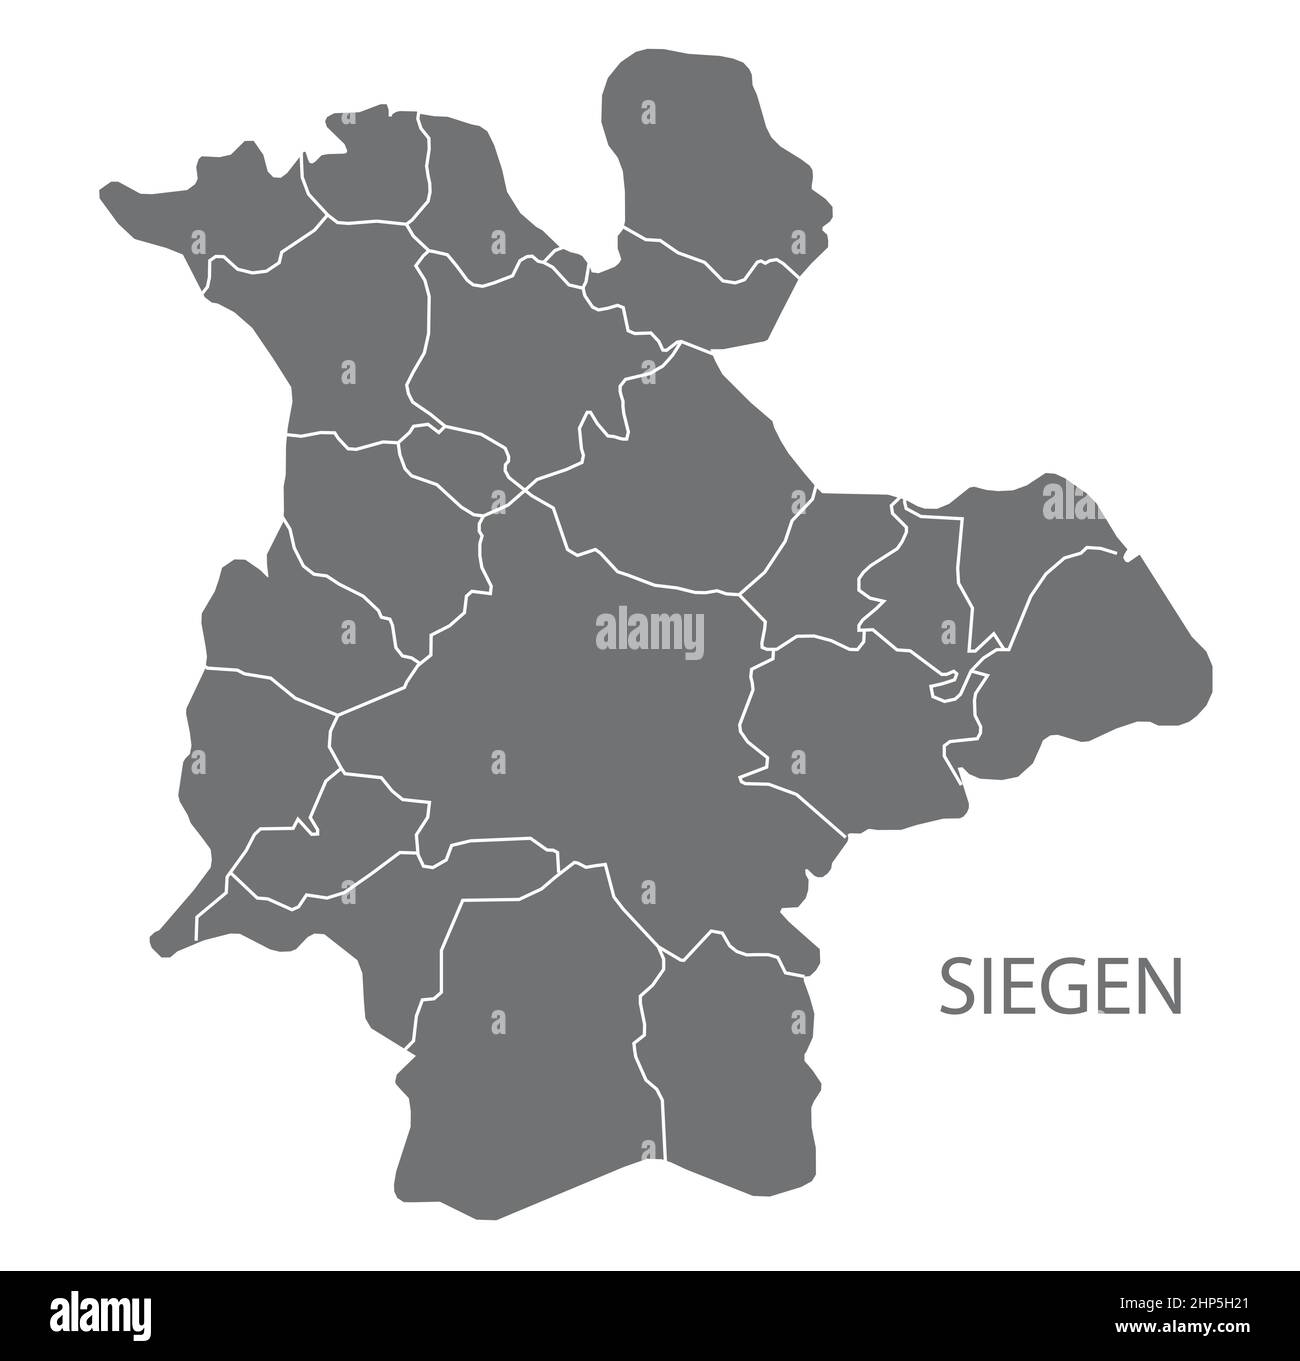 Modern City Map - Siegen city of Germany with districts grey DE Stock Vector